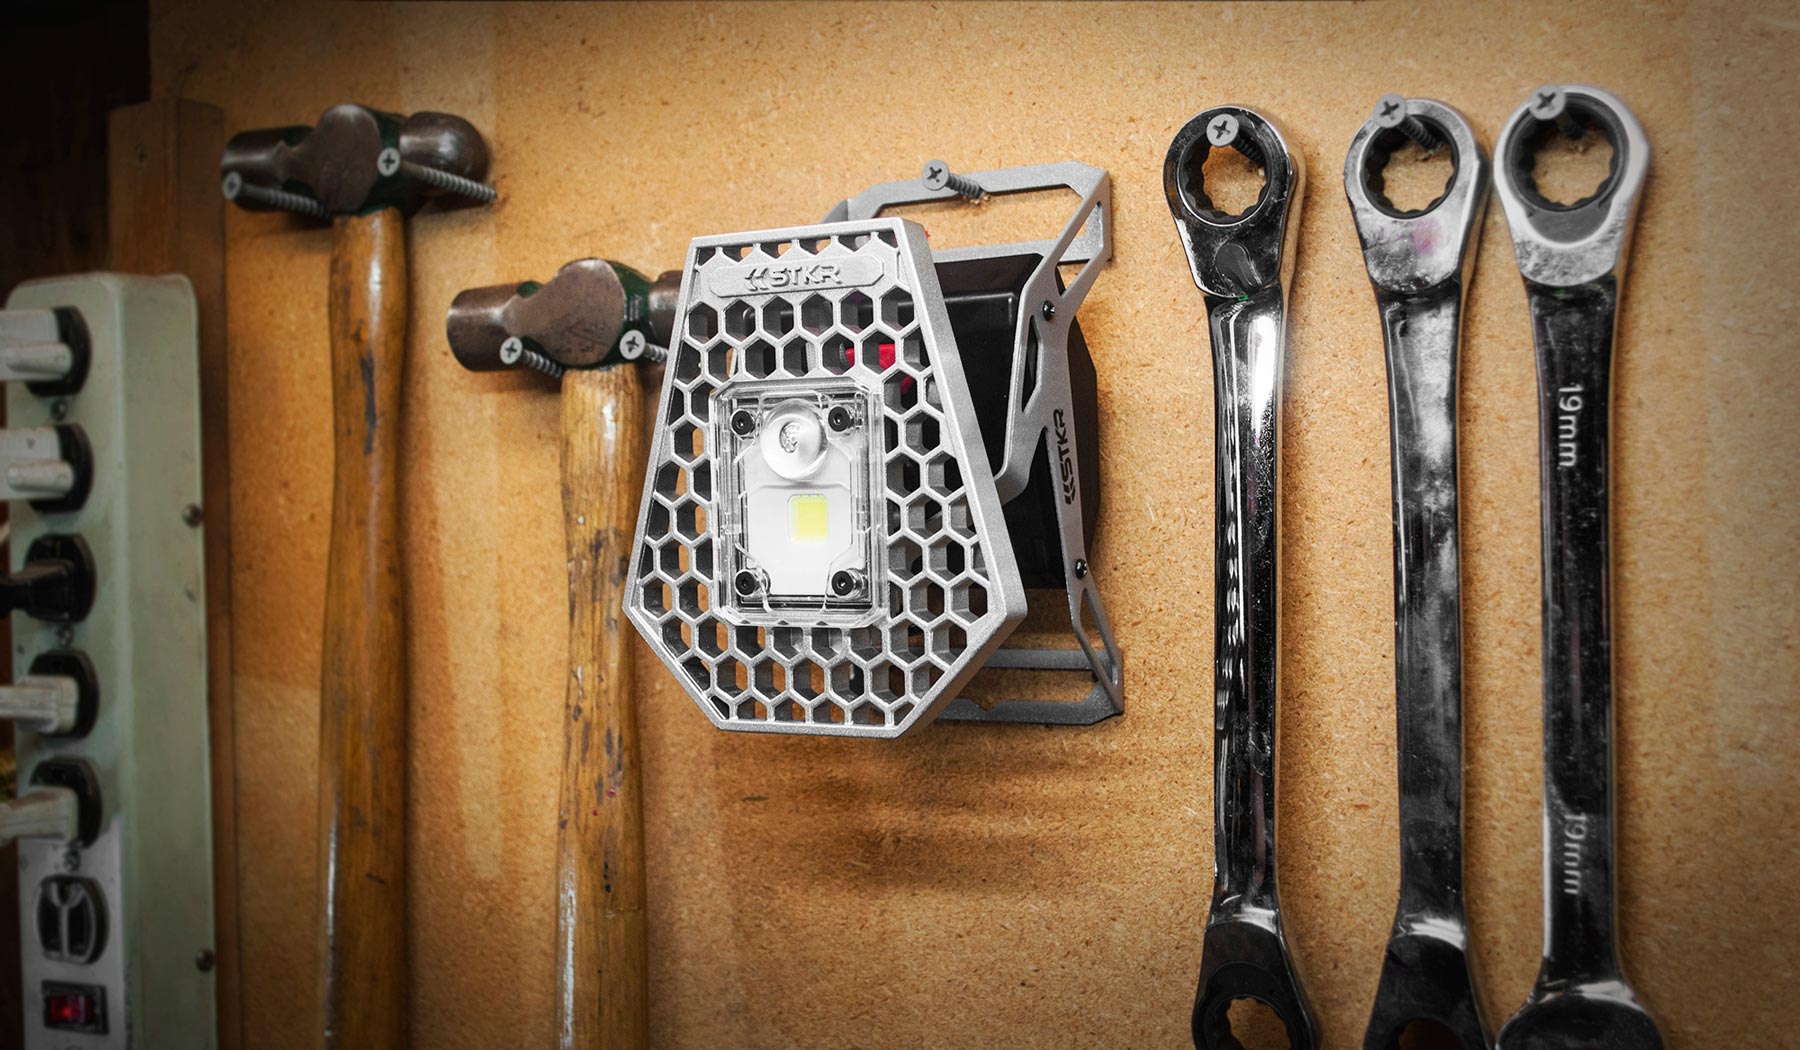 The Mobile Task Light hanging out in your workshop